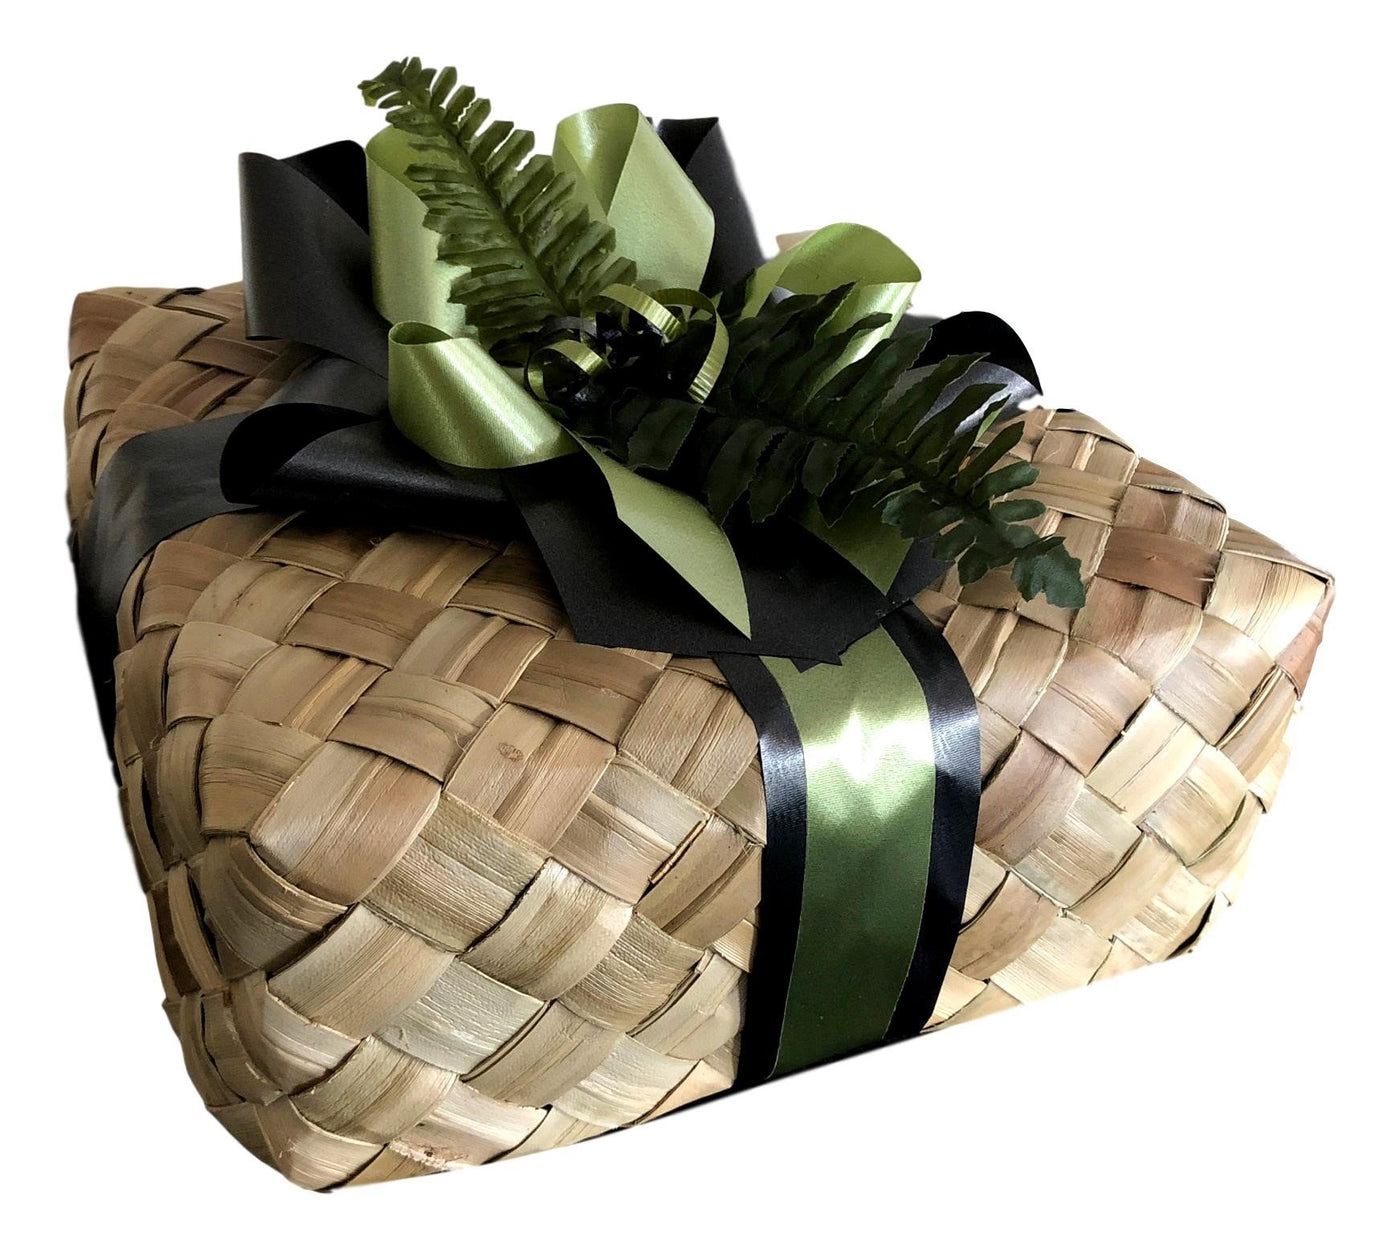 New Zealand Sympathy & Condolence Gift Baskets & Gift Hampers - Basket Creations NZ